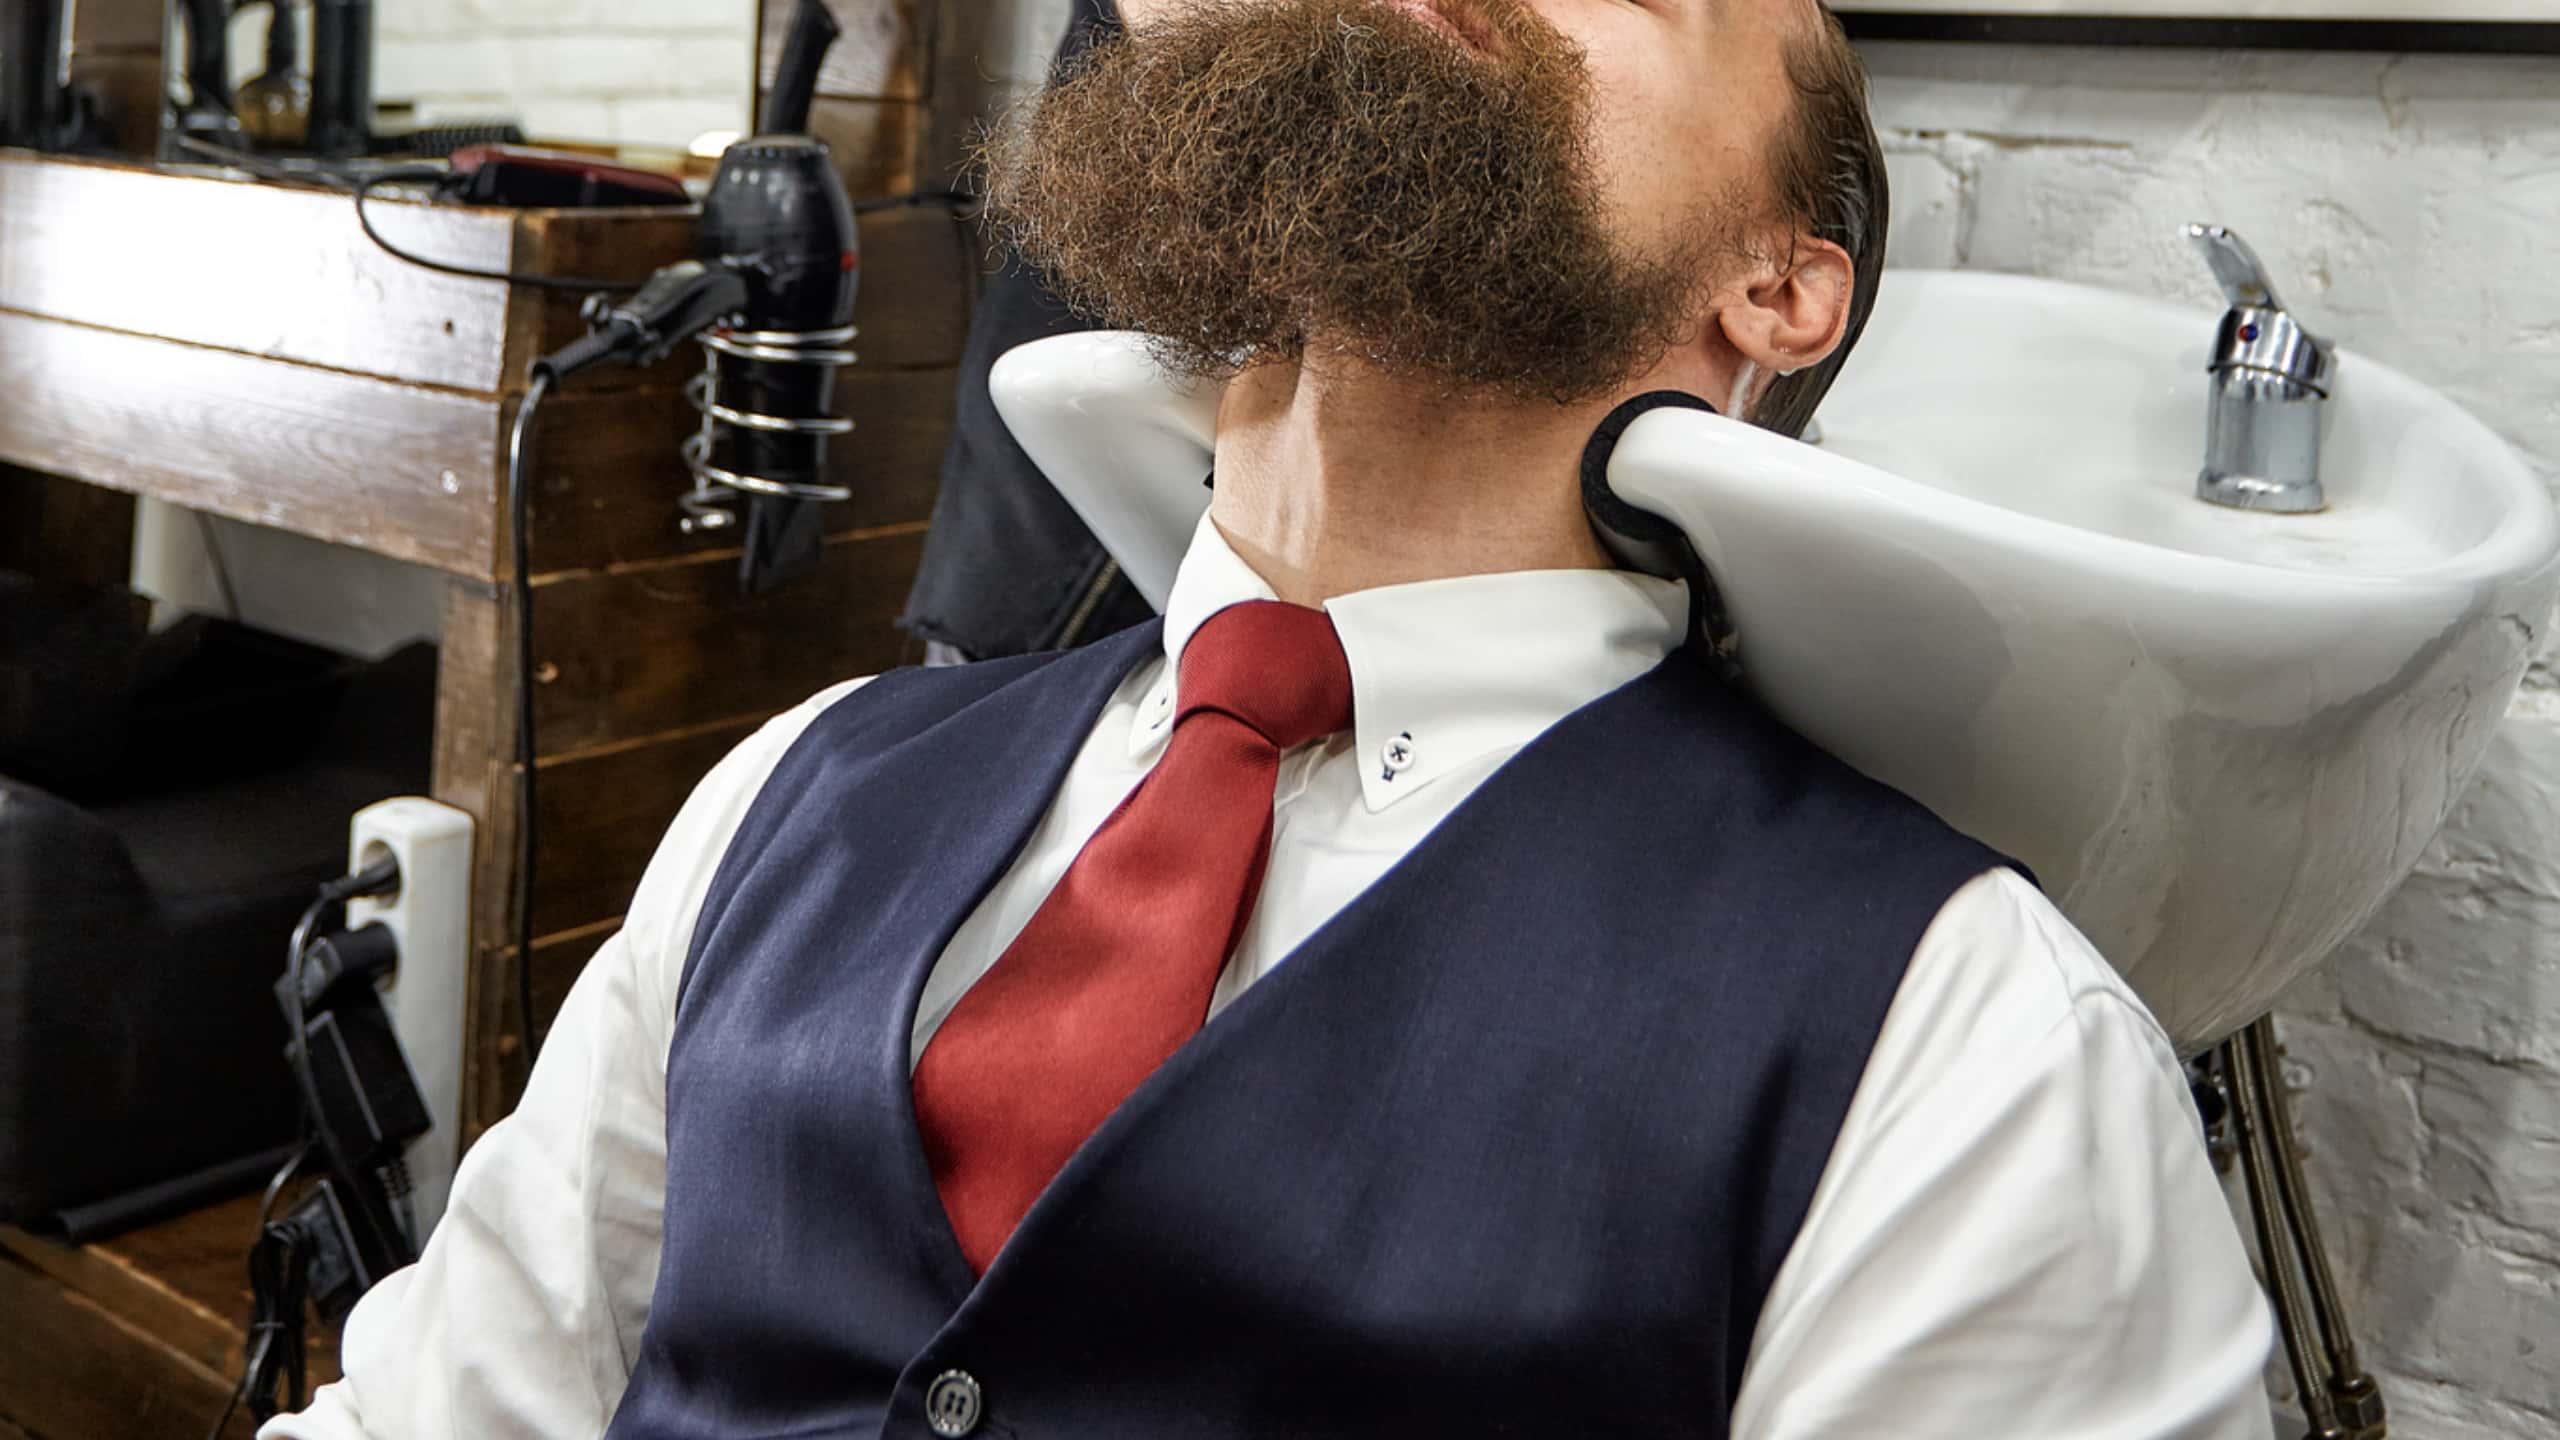 How to Properly Wash and Maintain Your Beard 